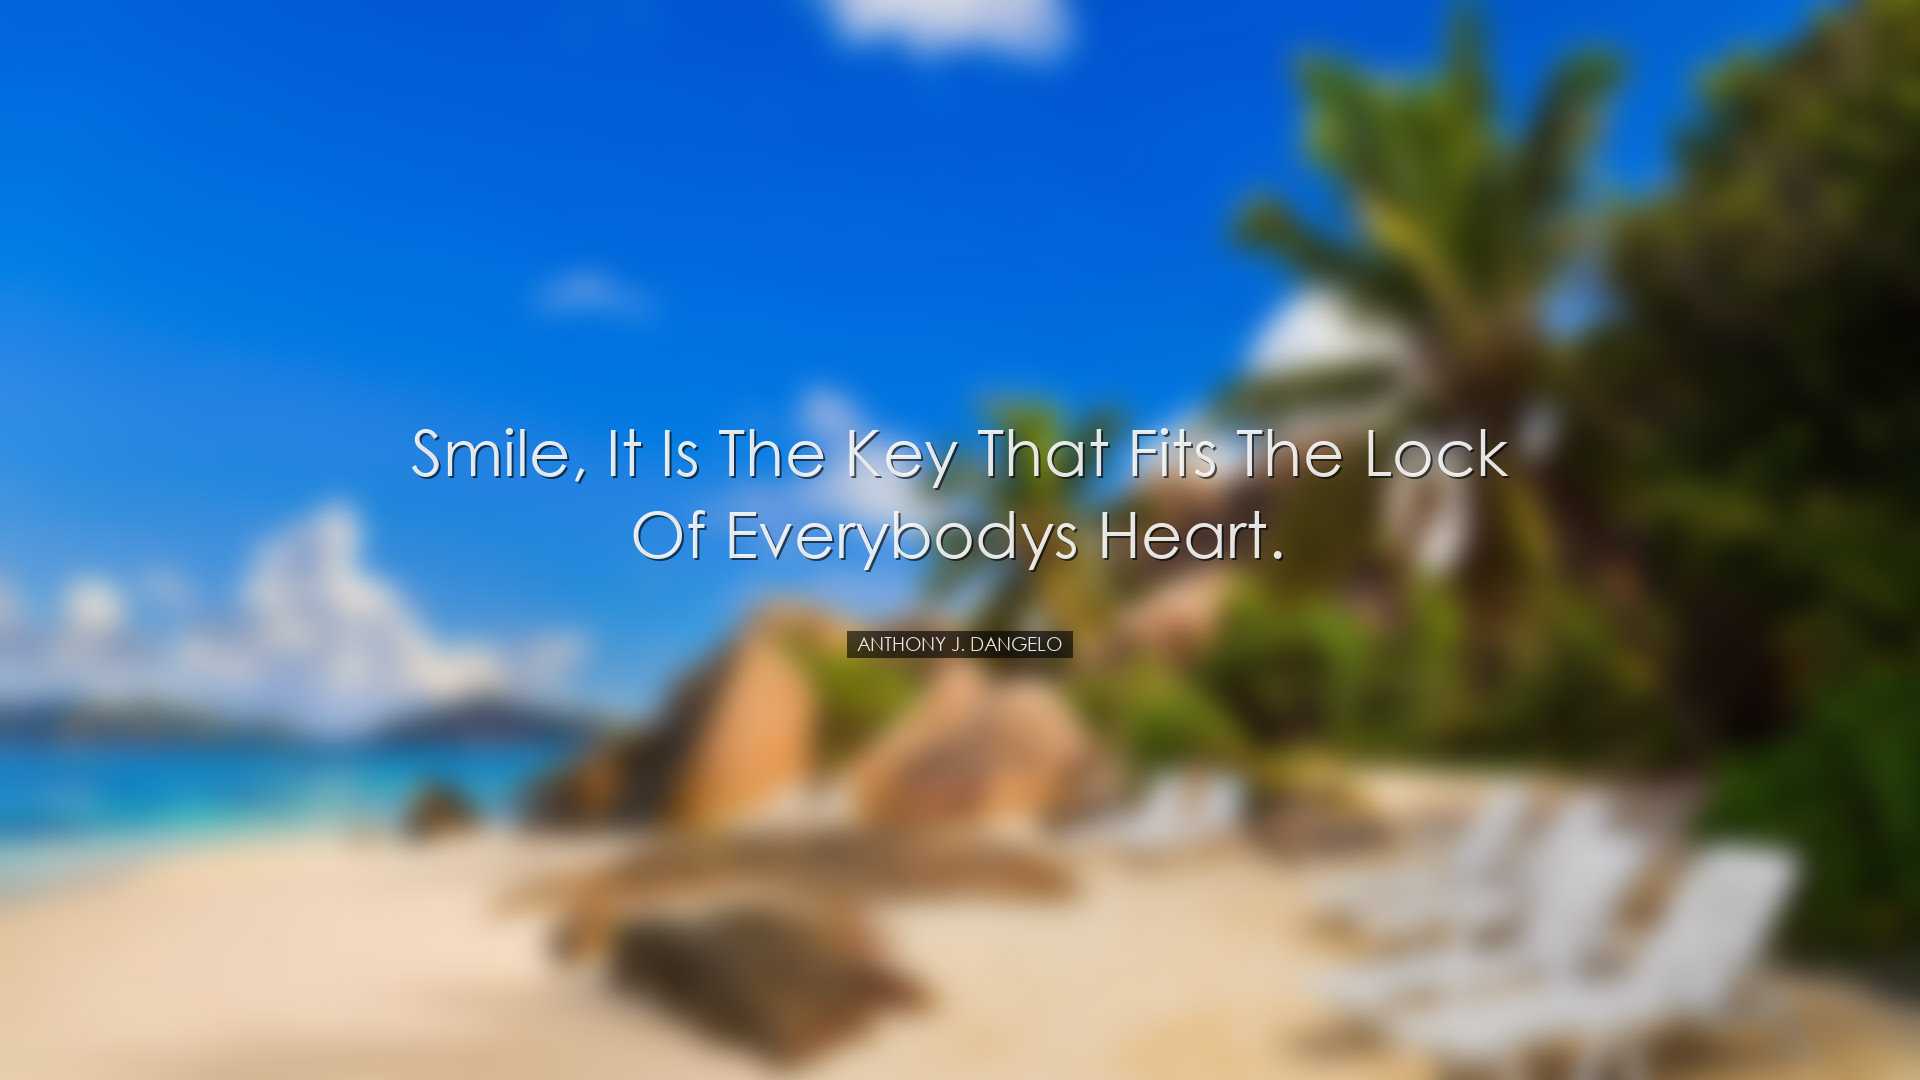 Smile, it is the key that fits the lock of everybodys heart. - Ant